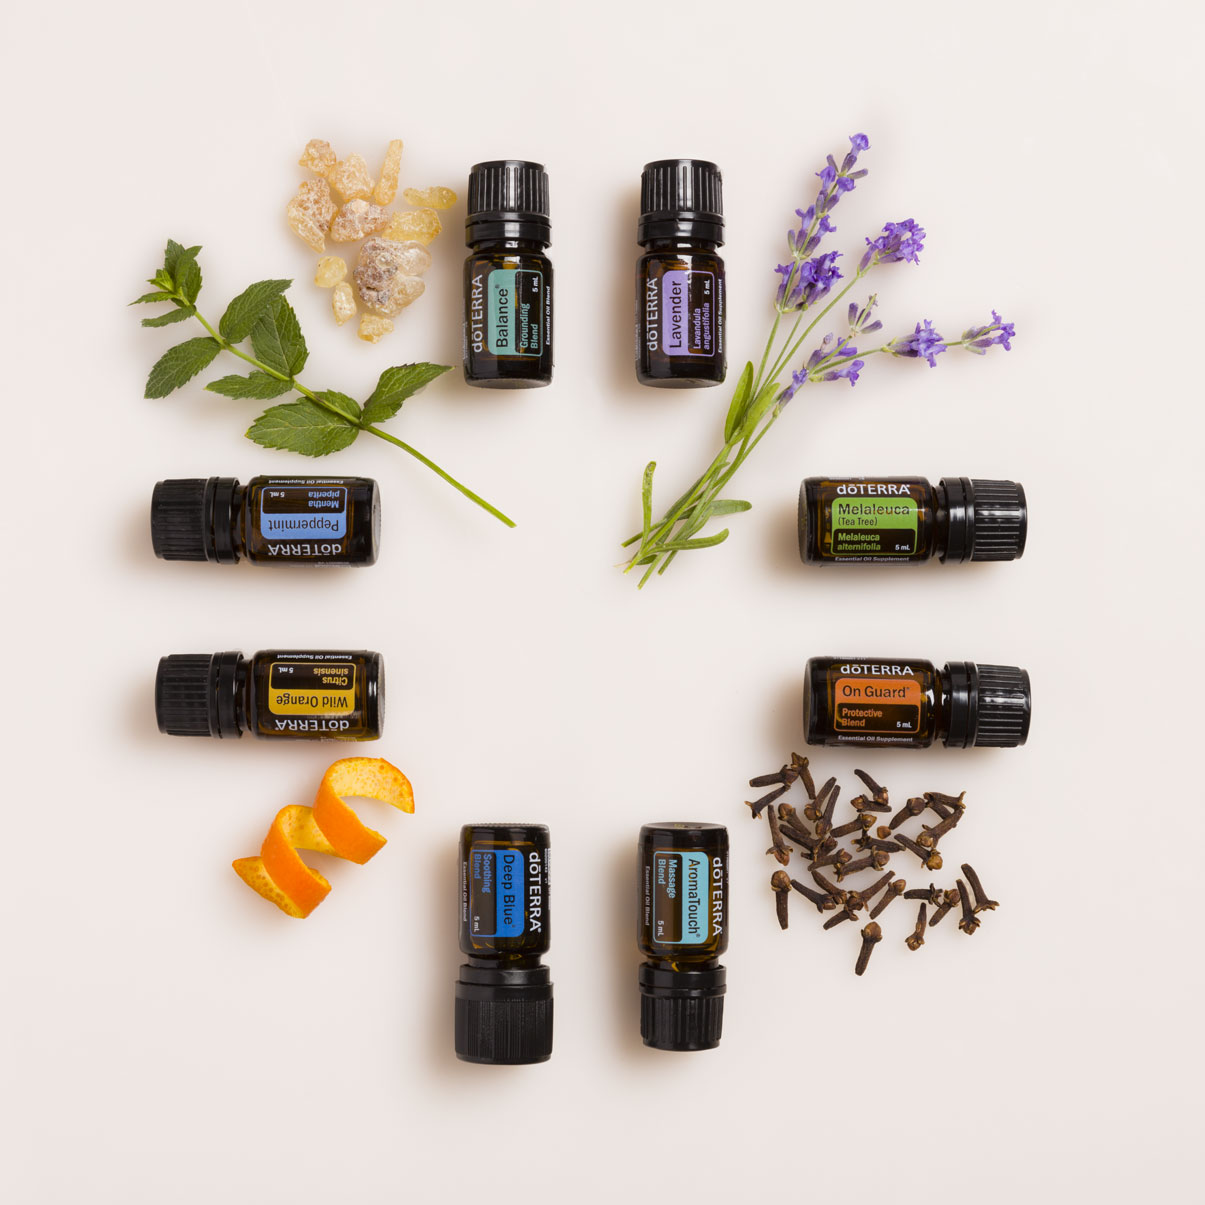 Doterra Aromatouch Technique Leona Mcdonnell Mindfulness And Wellness